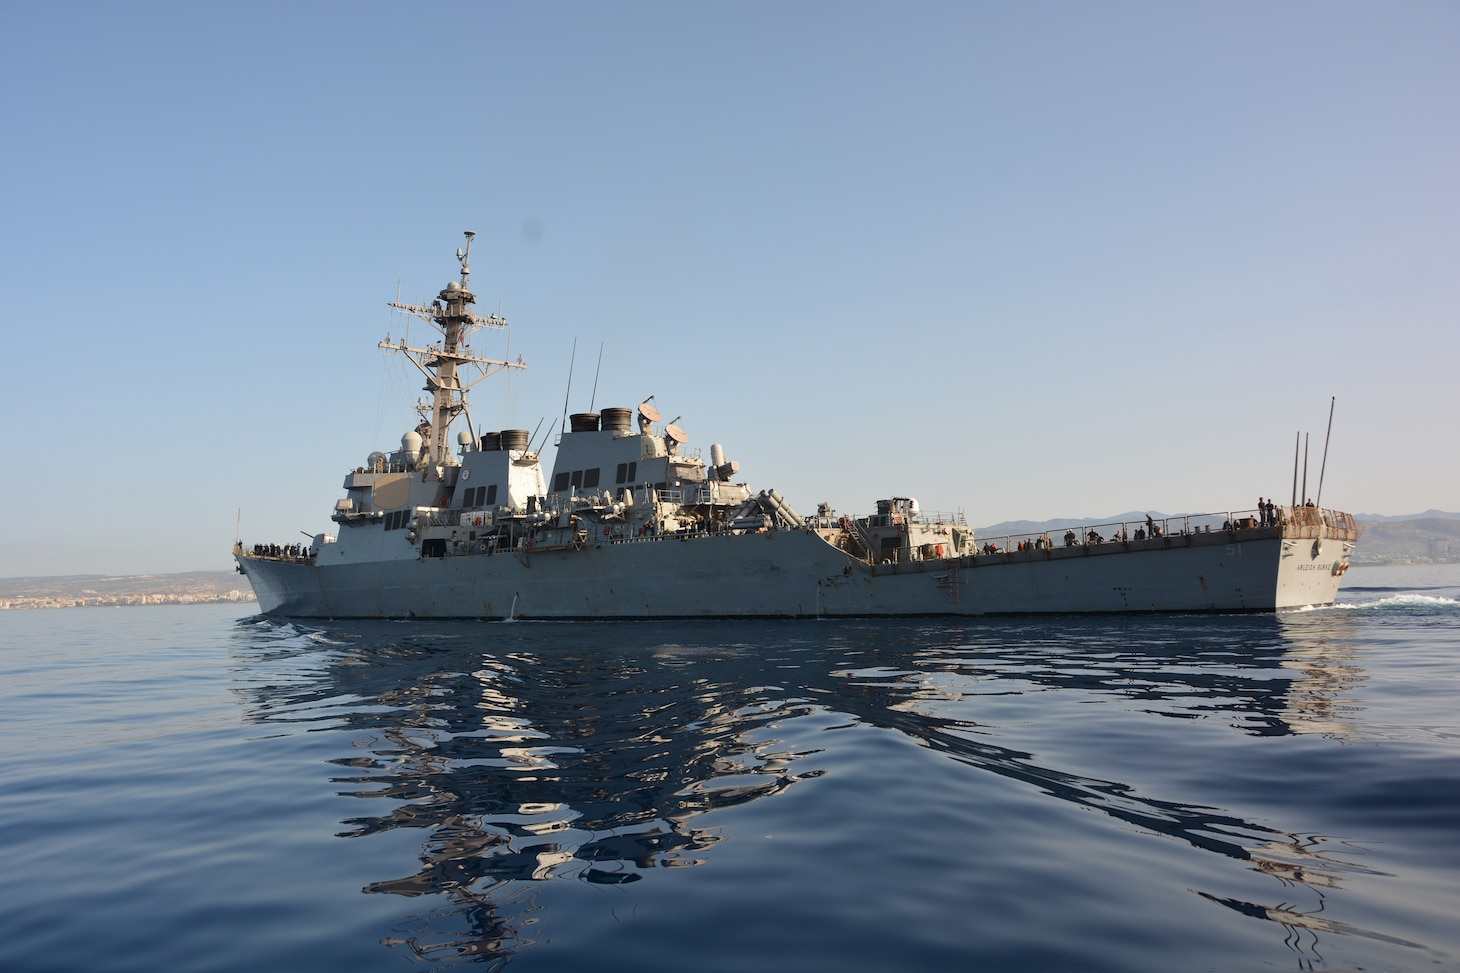 The Arleigh Burke-class guided-missile destroyer USS Arleigh Burke (DDG 51) arrived in Limassol, Cyprus for a scheduled port visit, May 16, 2023.